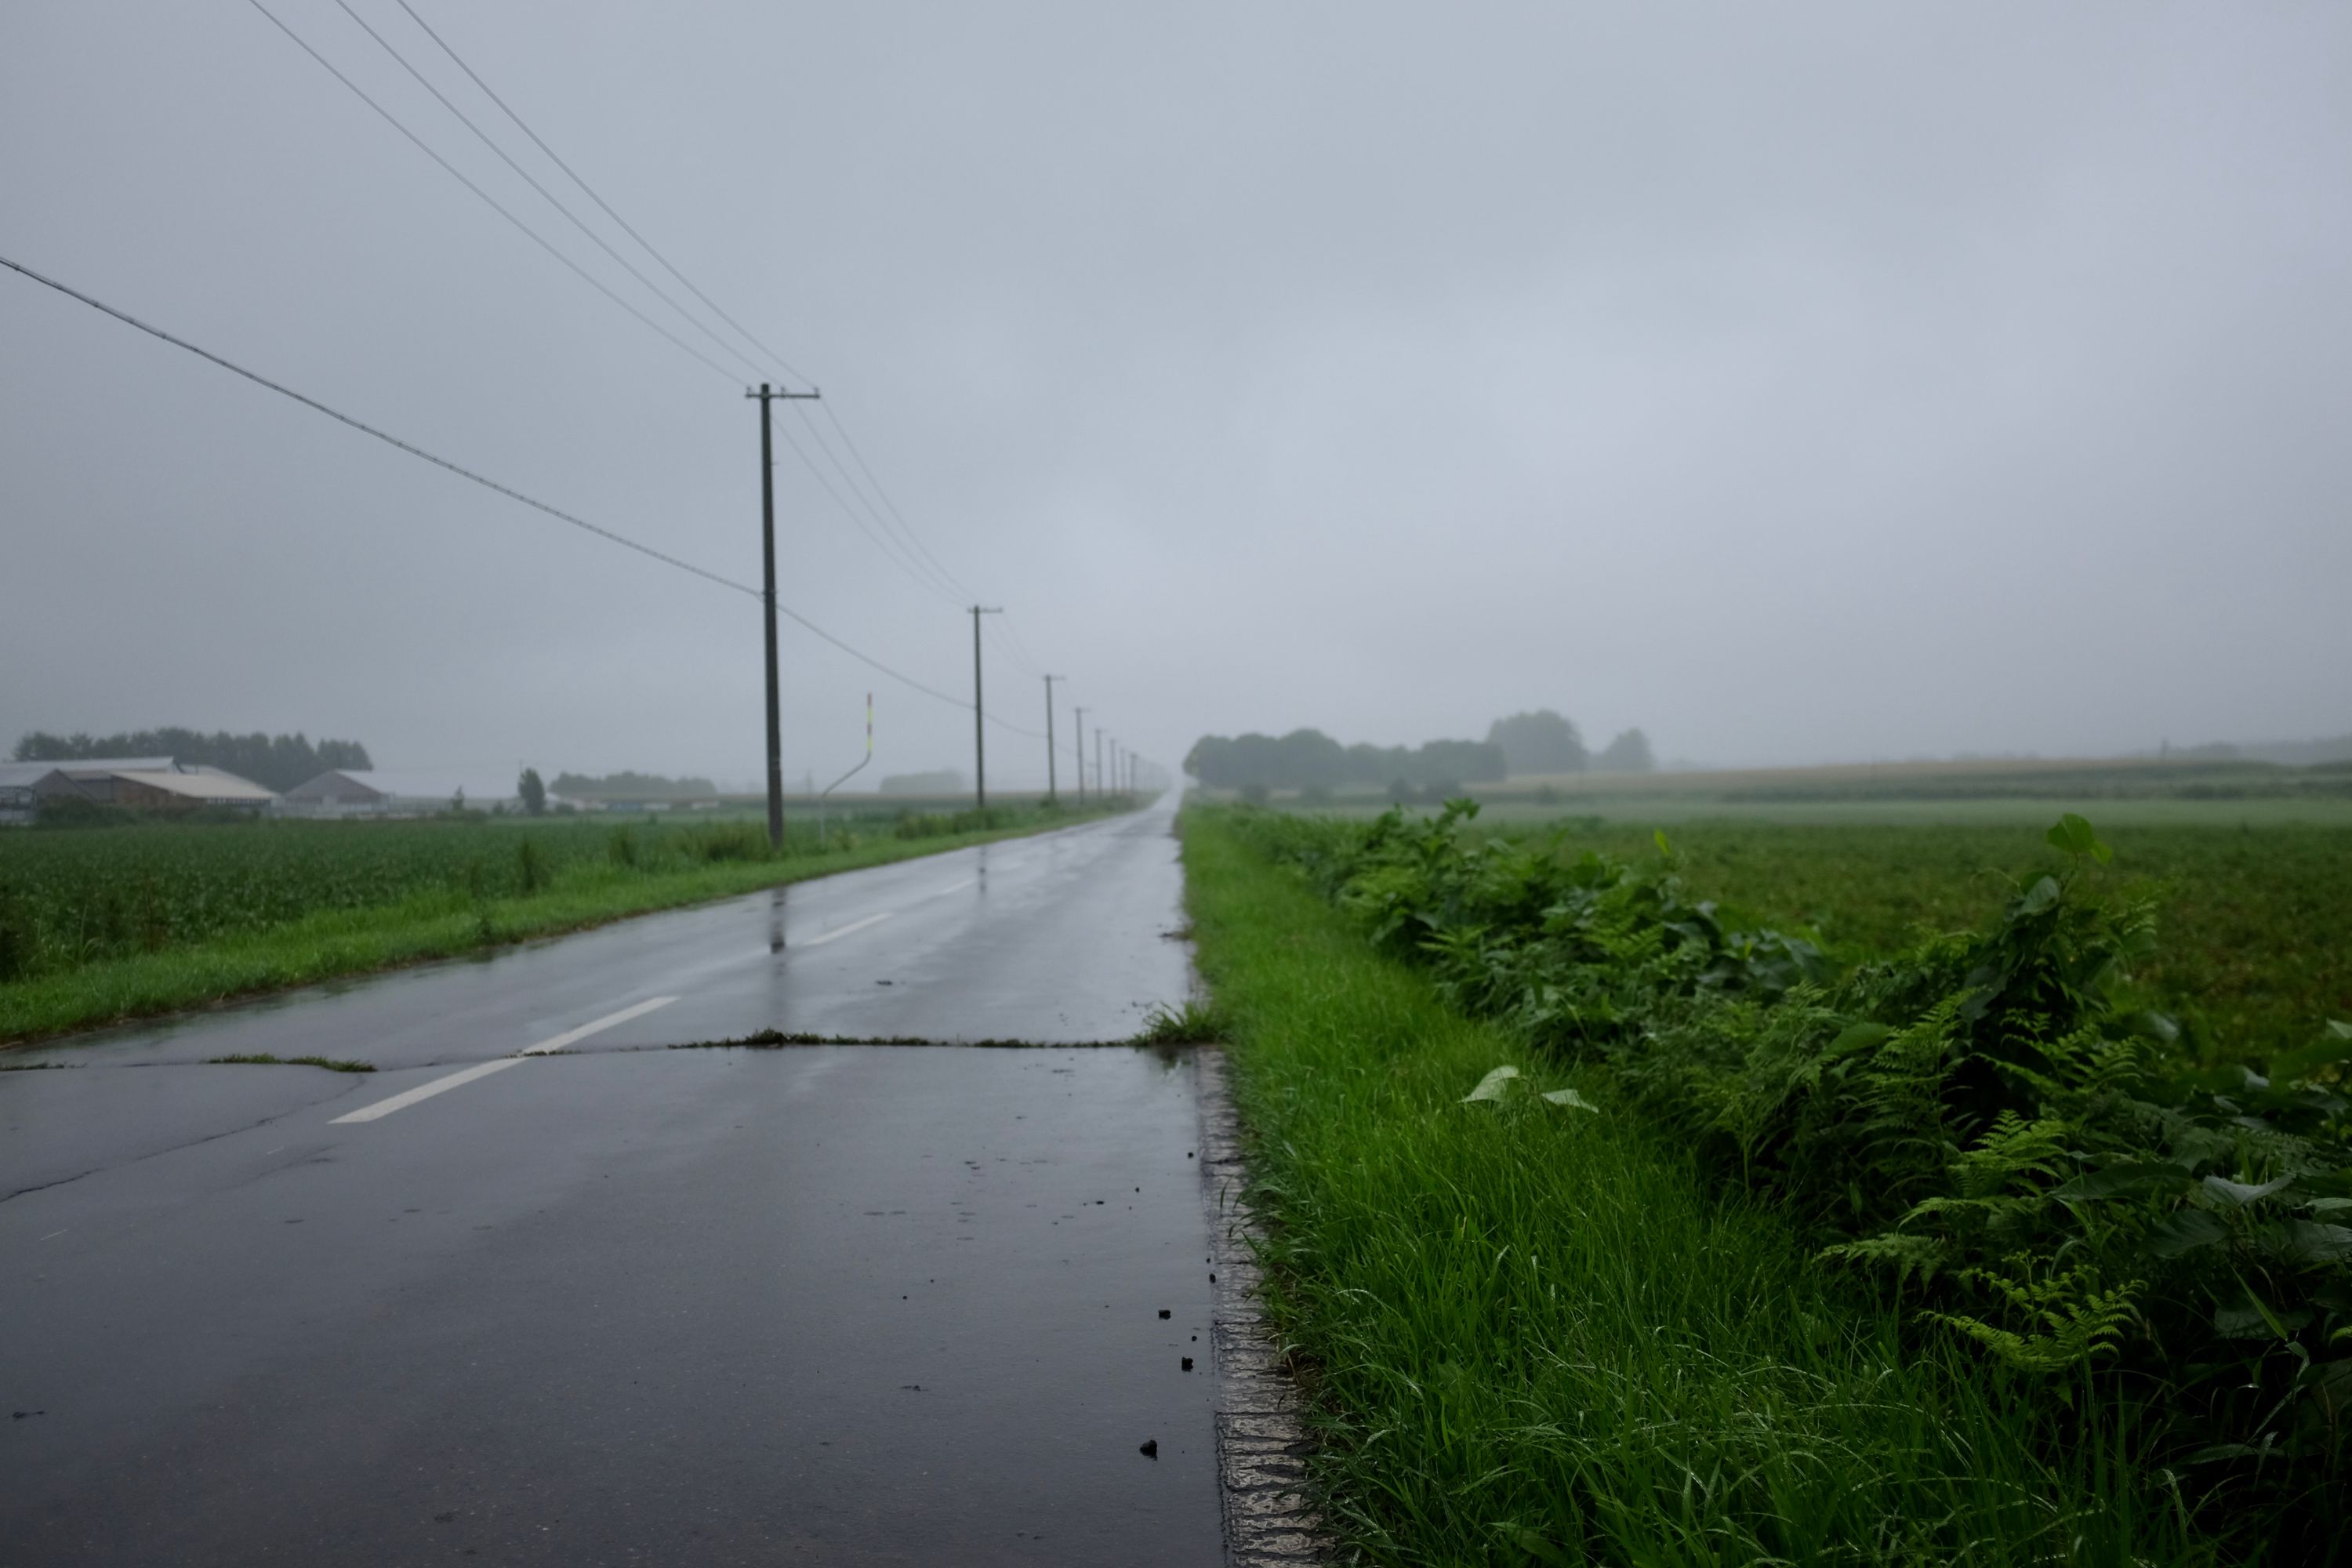 A straight road extends into the distance between fields under grey clouds.